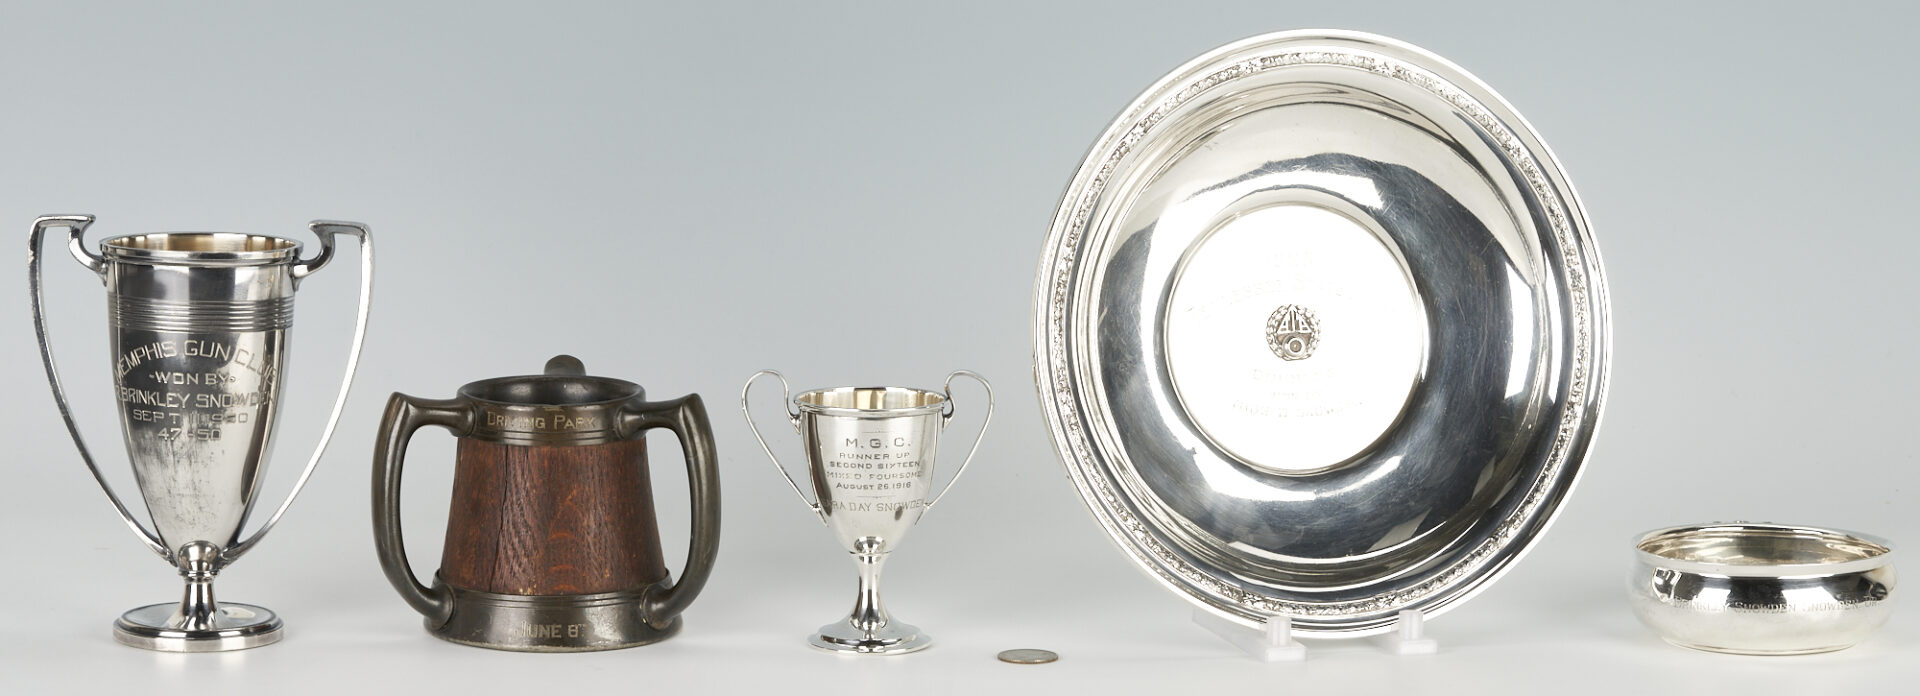 Lot 251: 5 Antique Trophies incl. Sterling Silver, Snowden Family Provenance